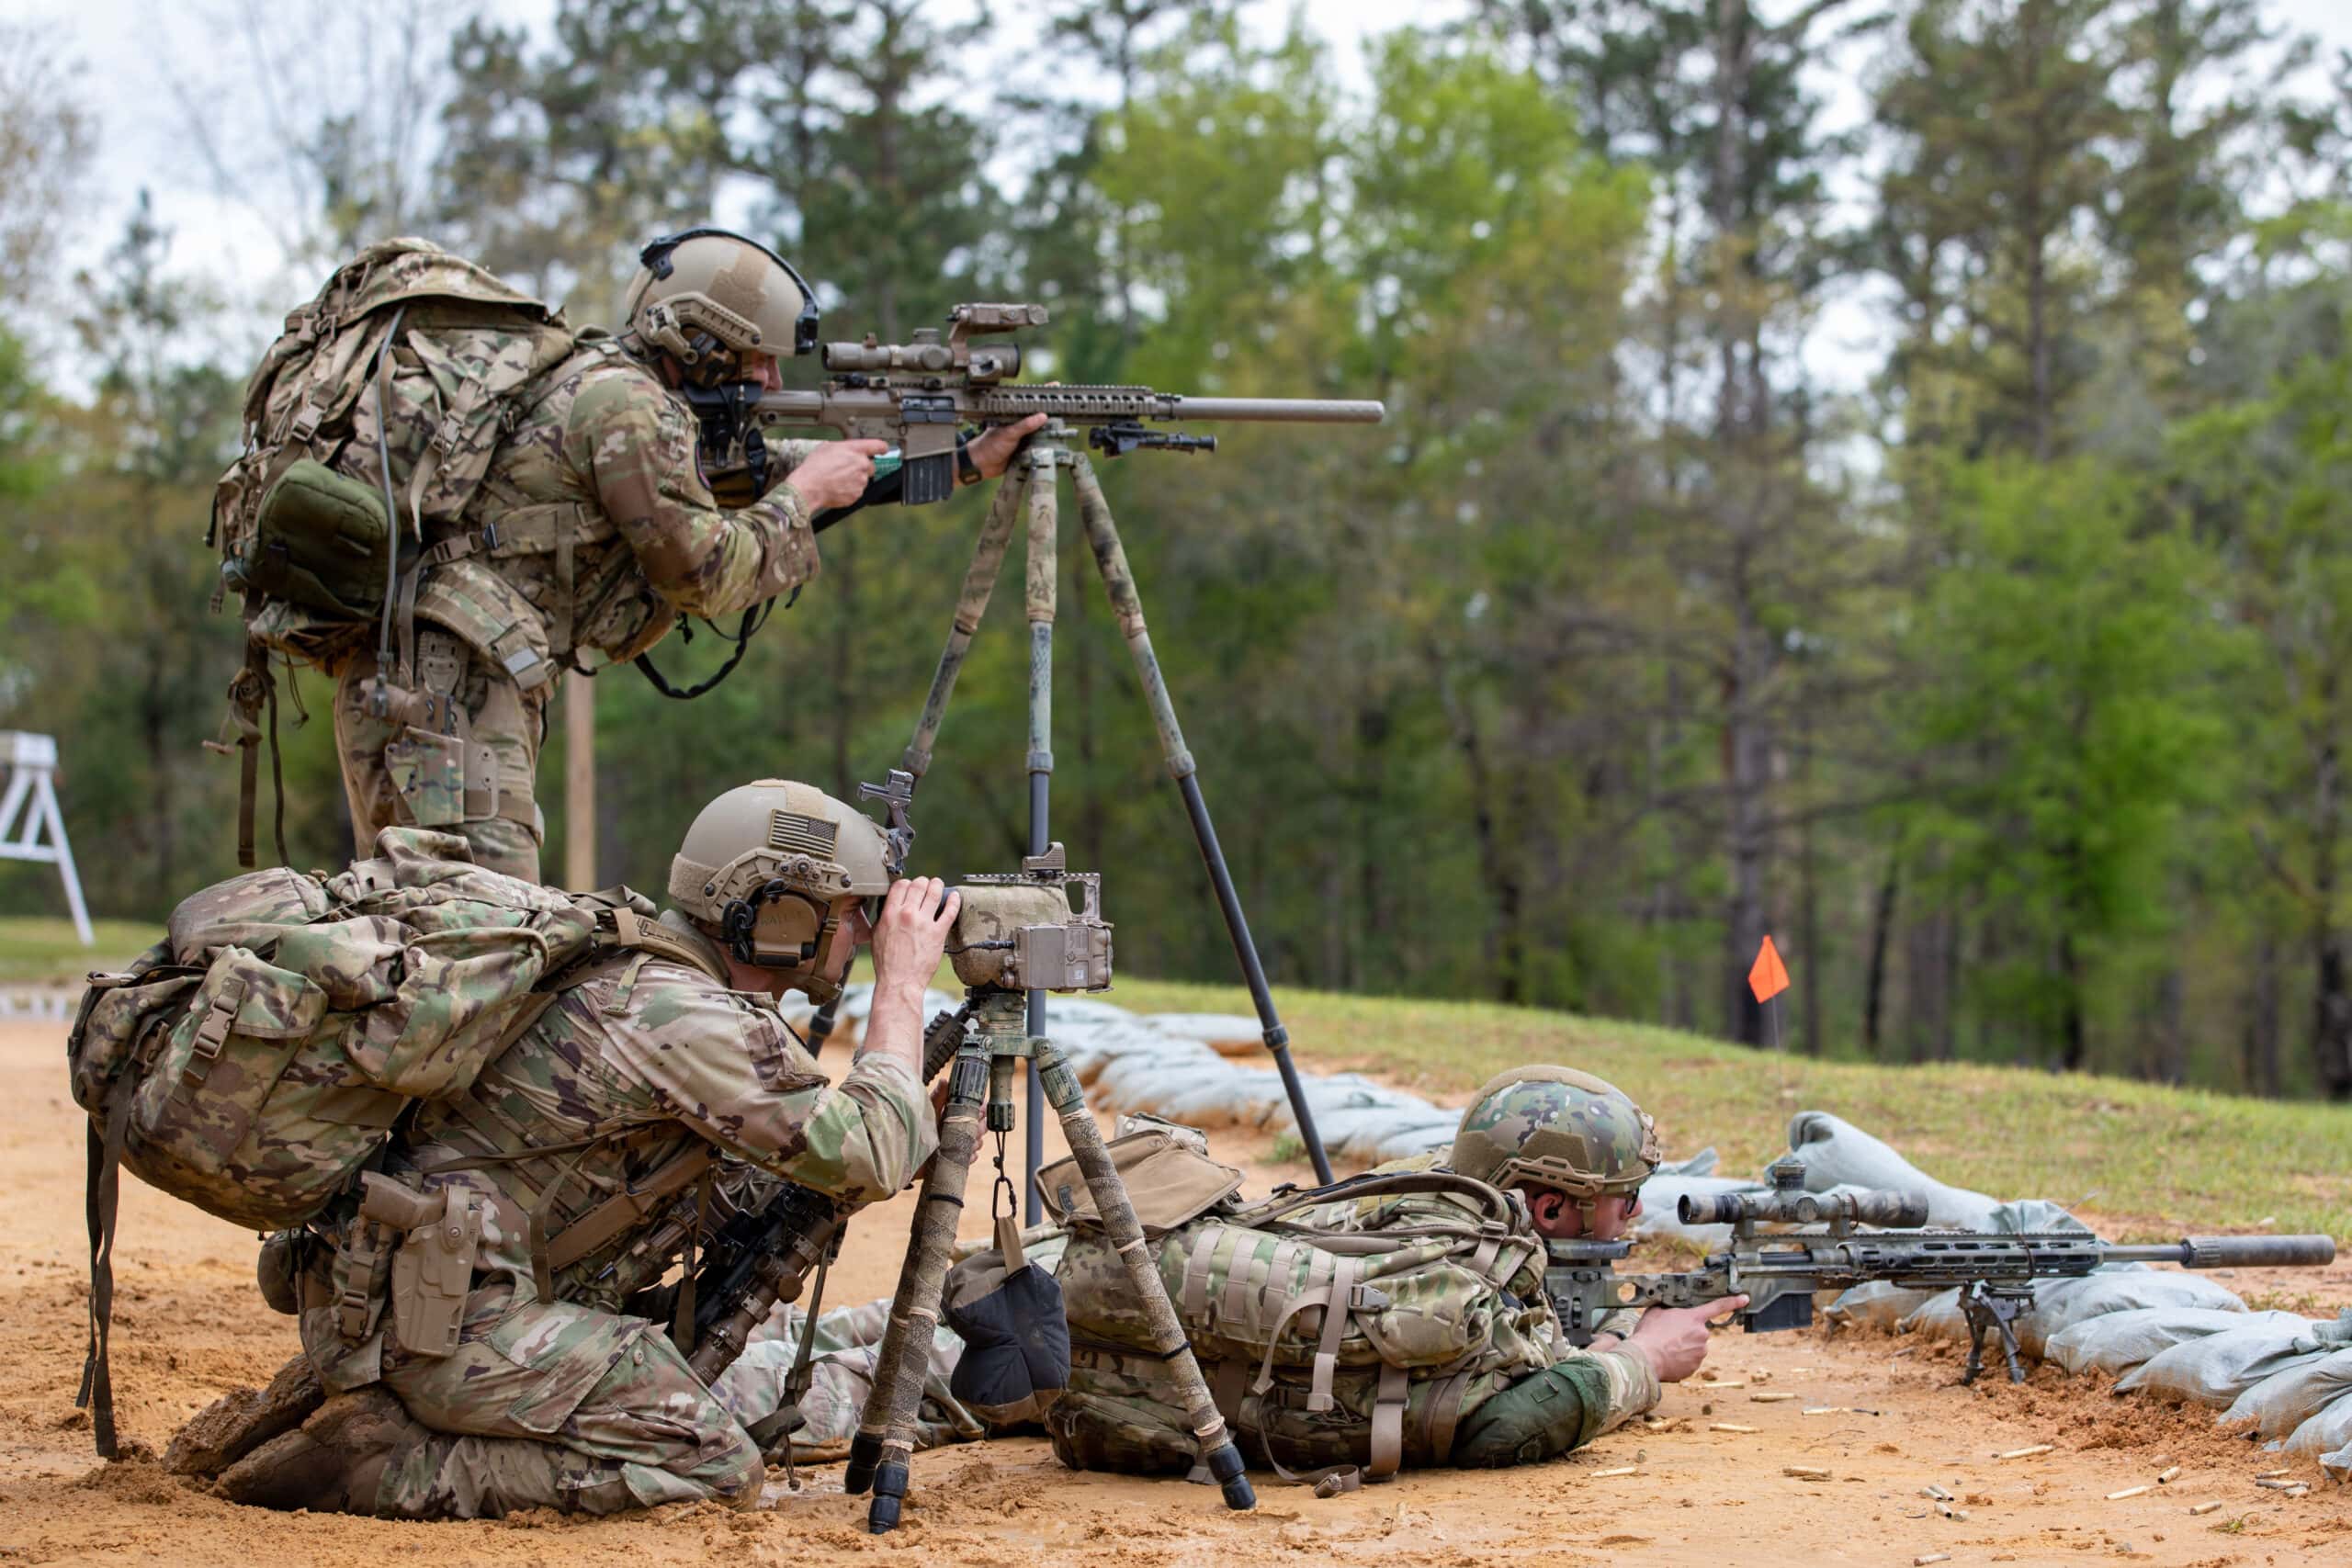 82nd AIRBORNE Division Foreign Made SNIPER 